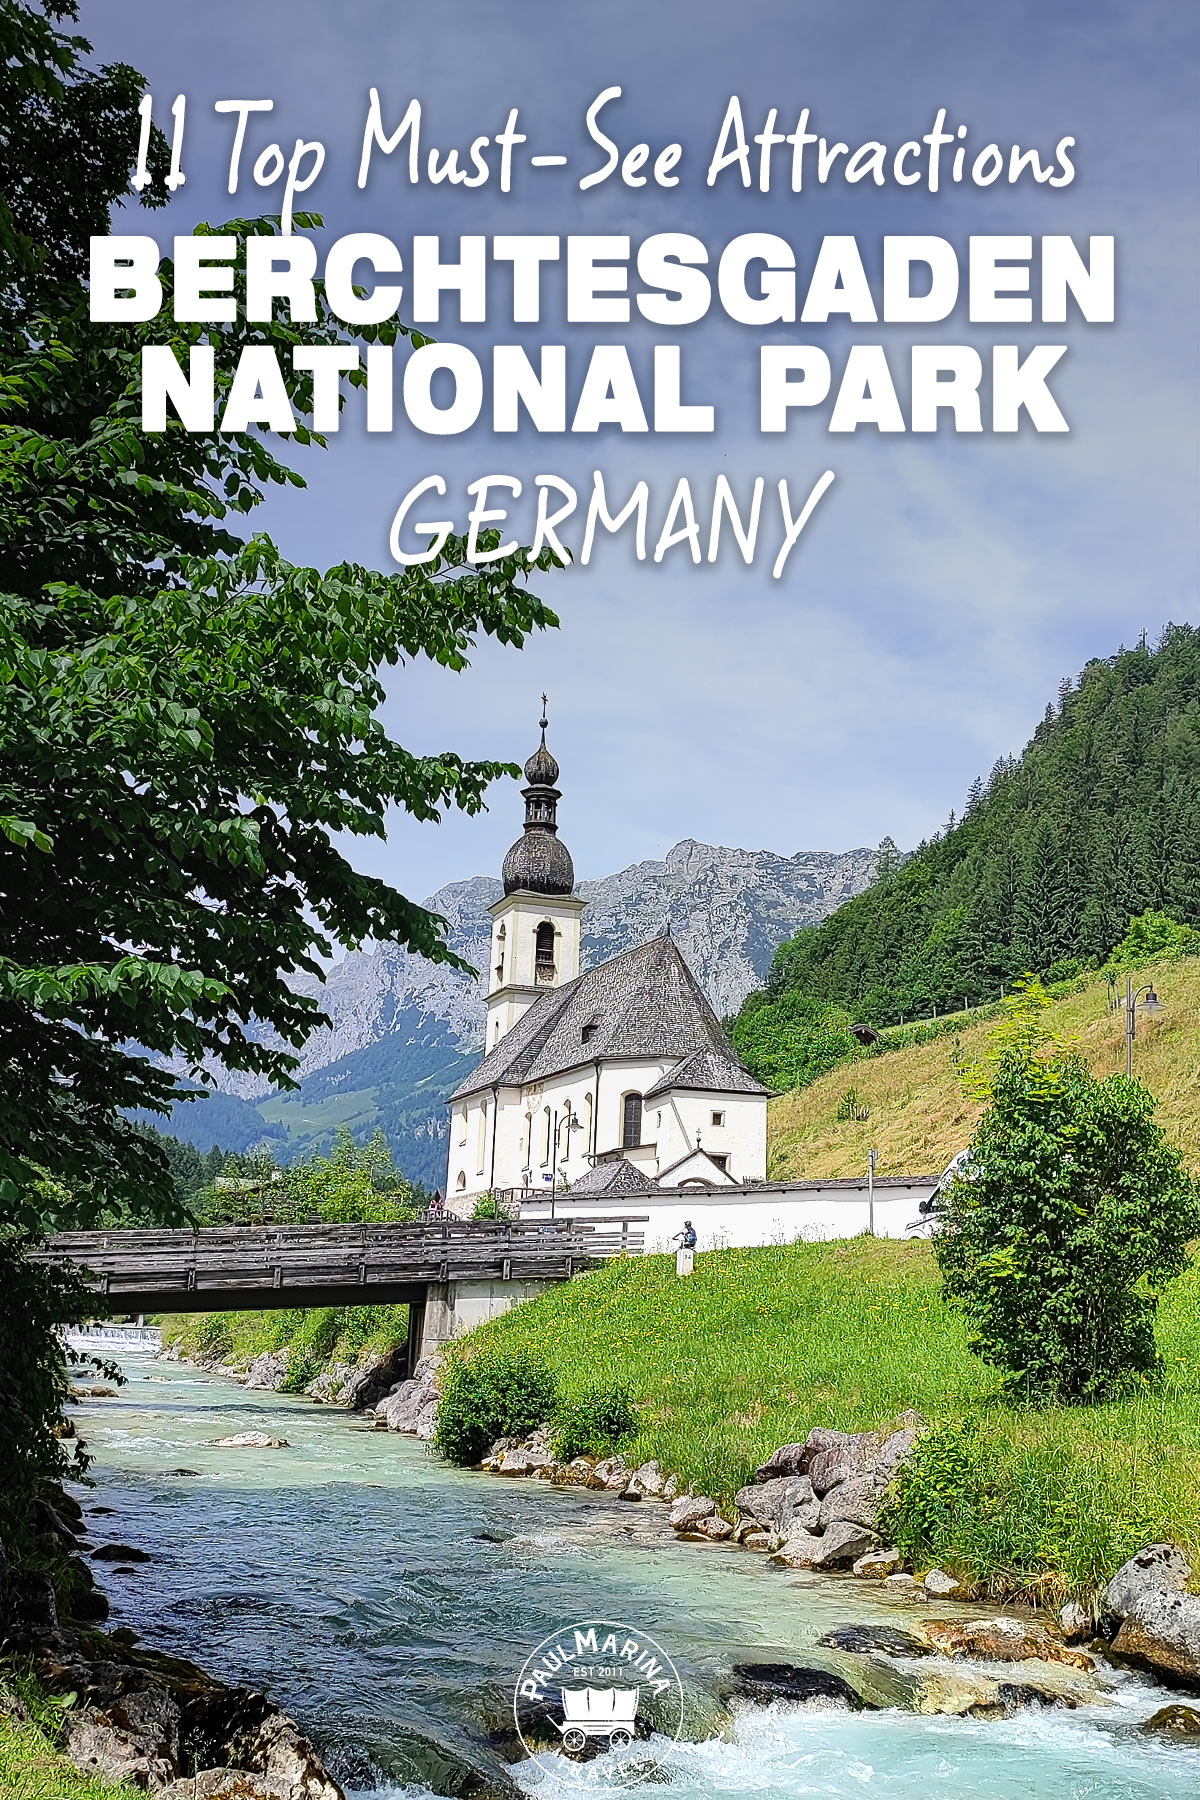 Berchtesgaden National Park: 11 Top Must-See Attractions cover image